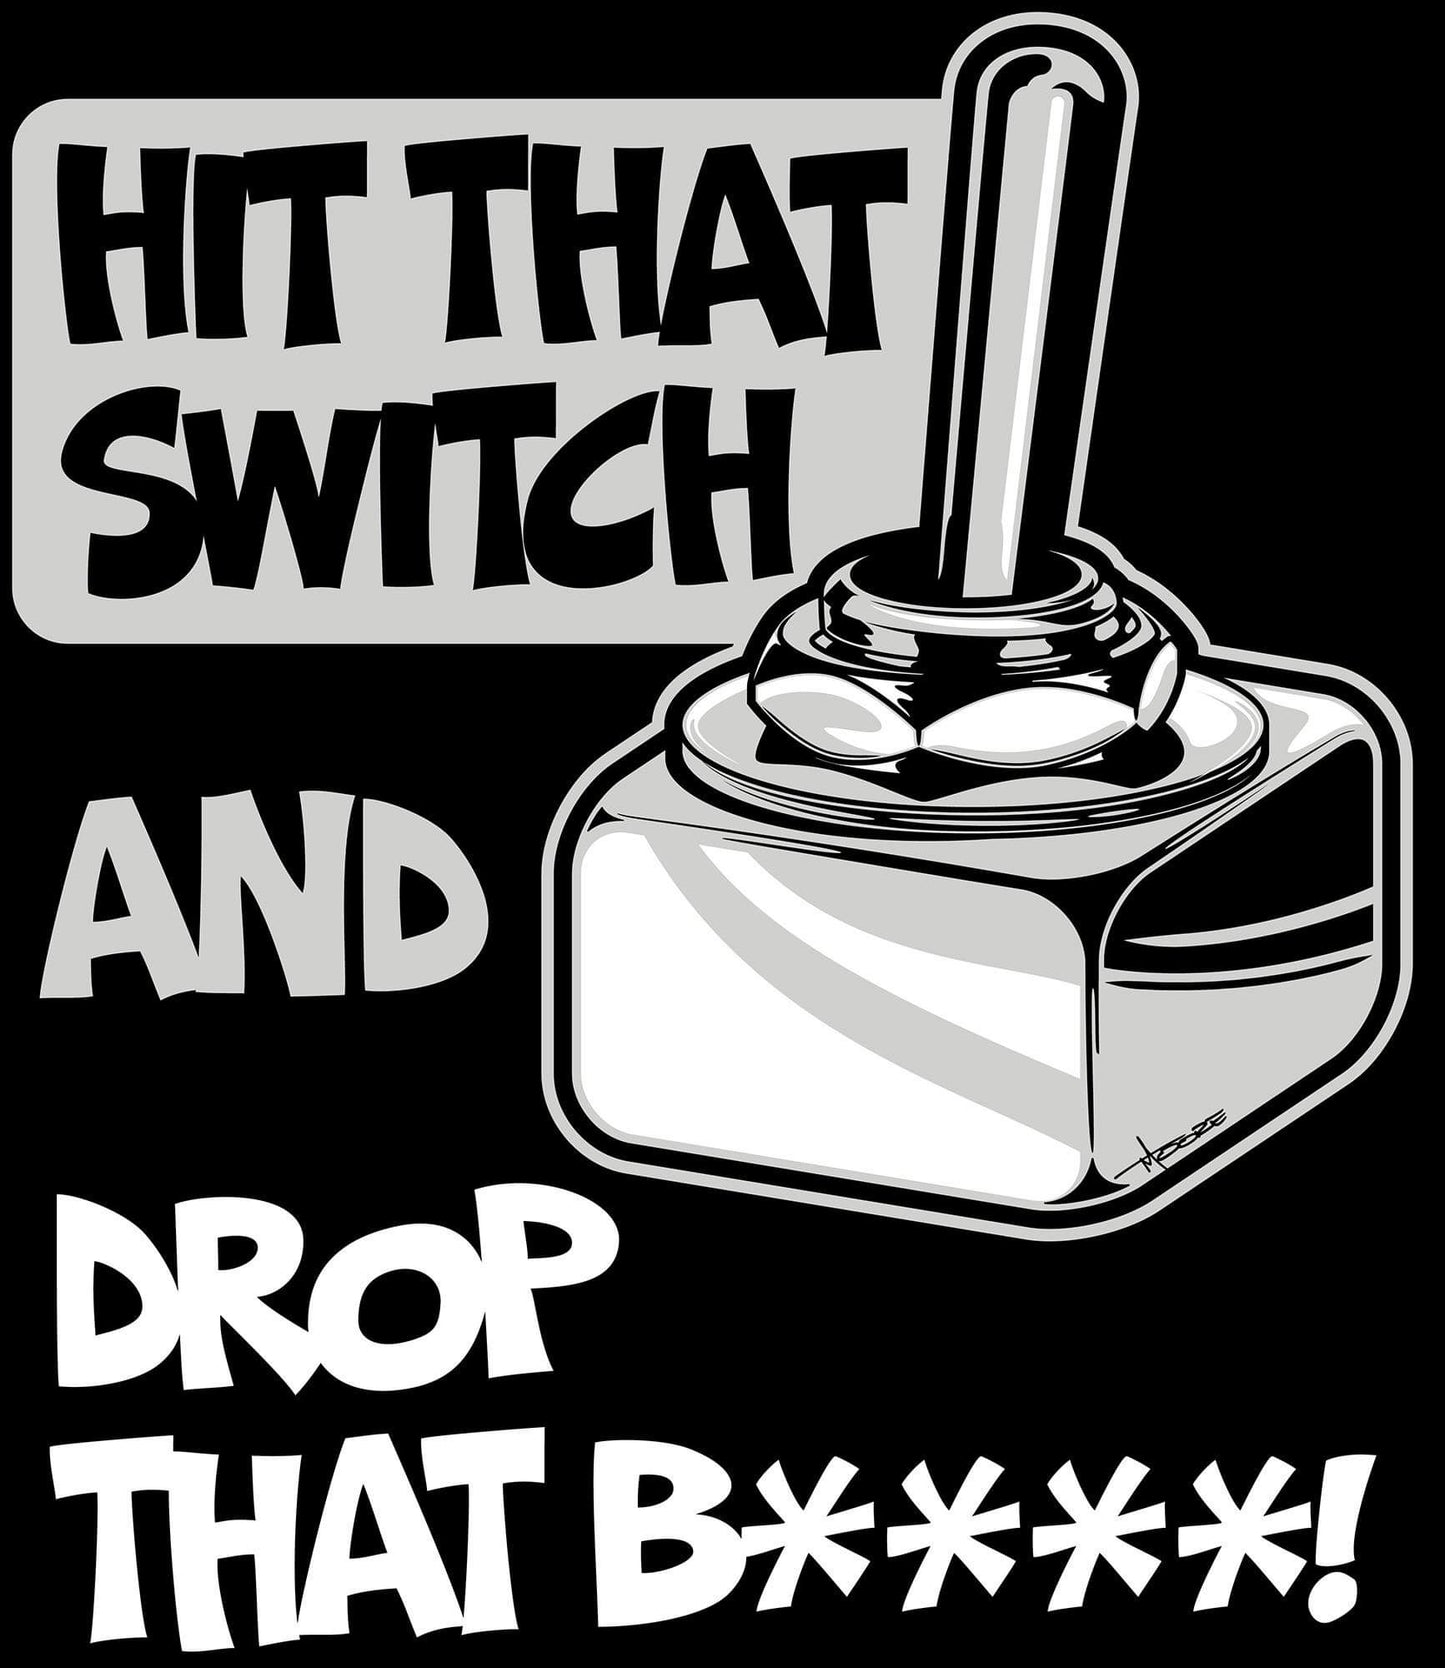 Hit That Switch And Drop That B****!!